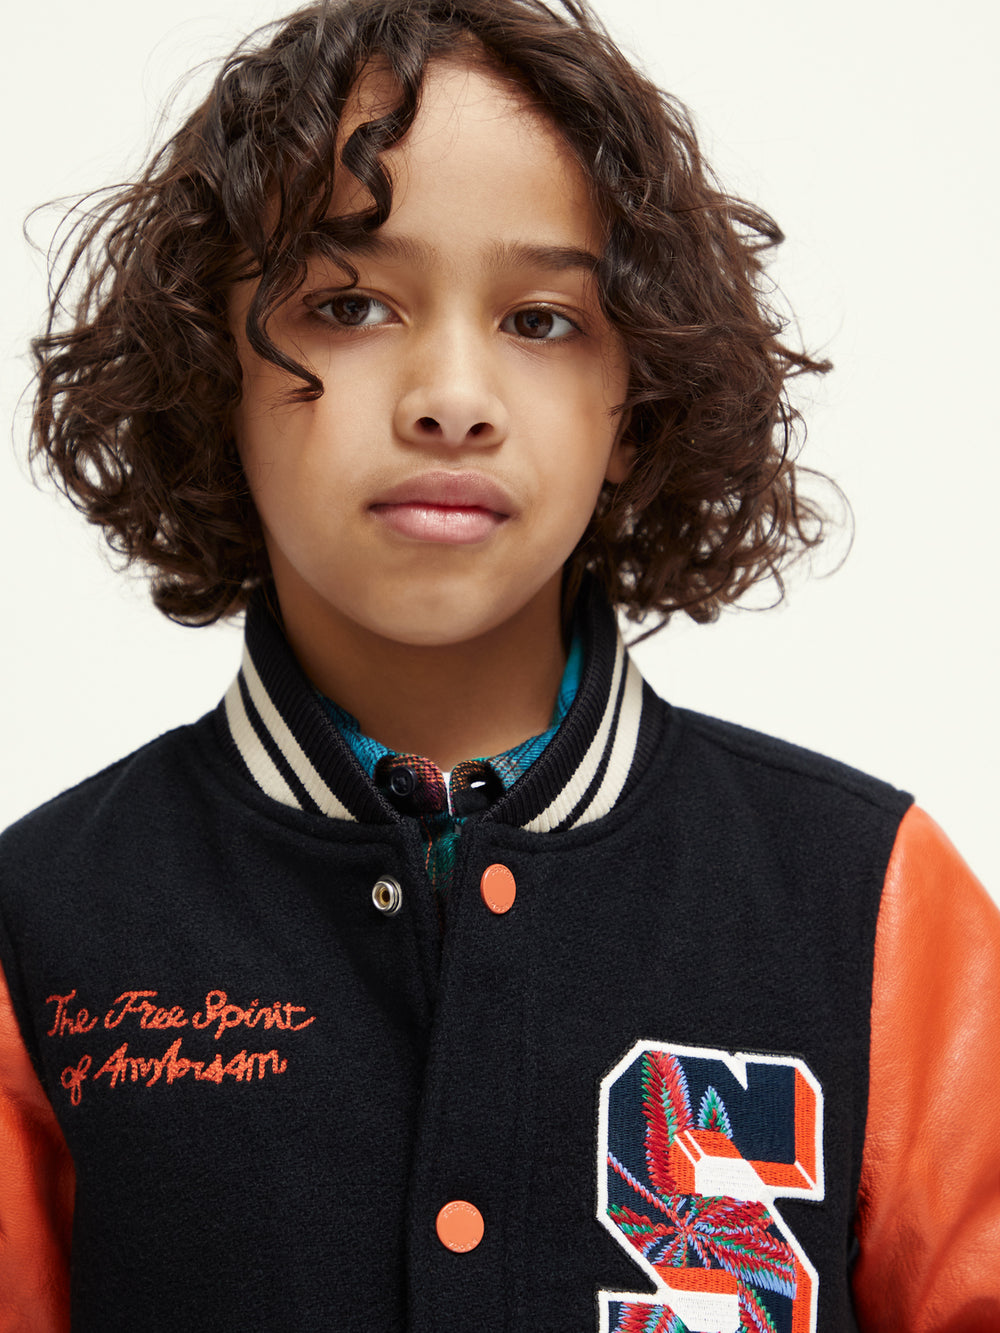 Kids - Wool college jacket with leather sleeves - Scotch & Soda NZ